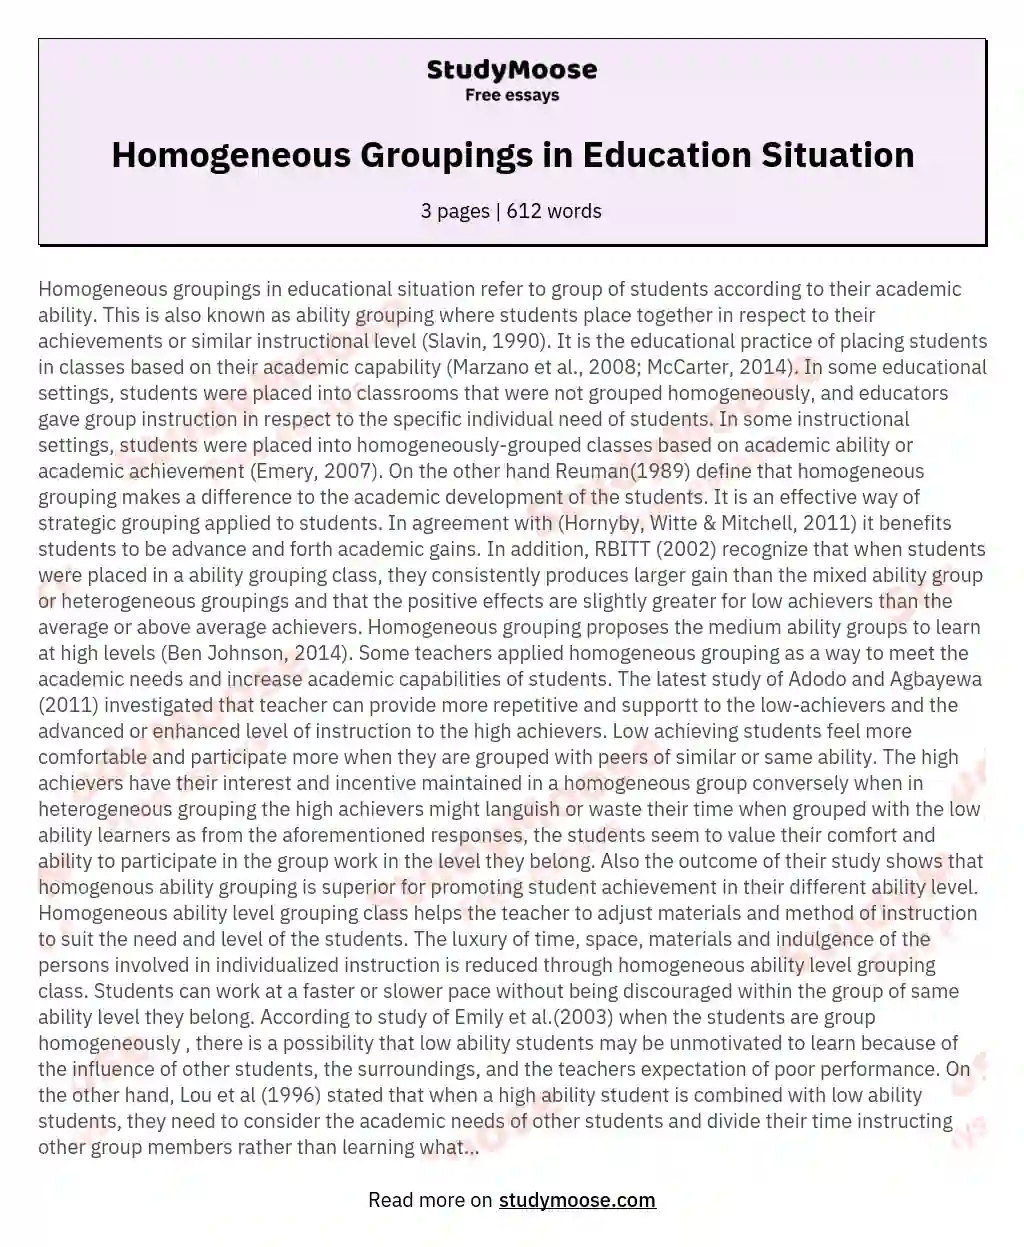 Homogeneous Groupings in Education Situation essay